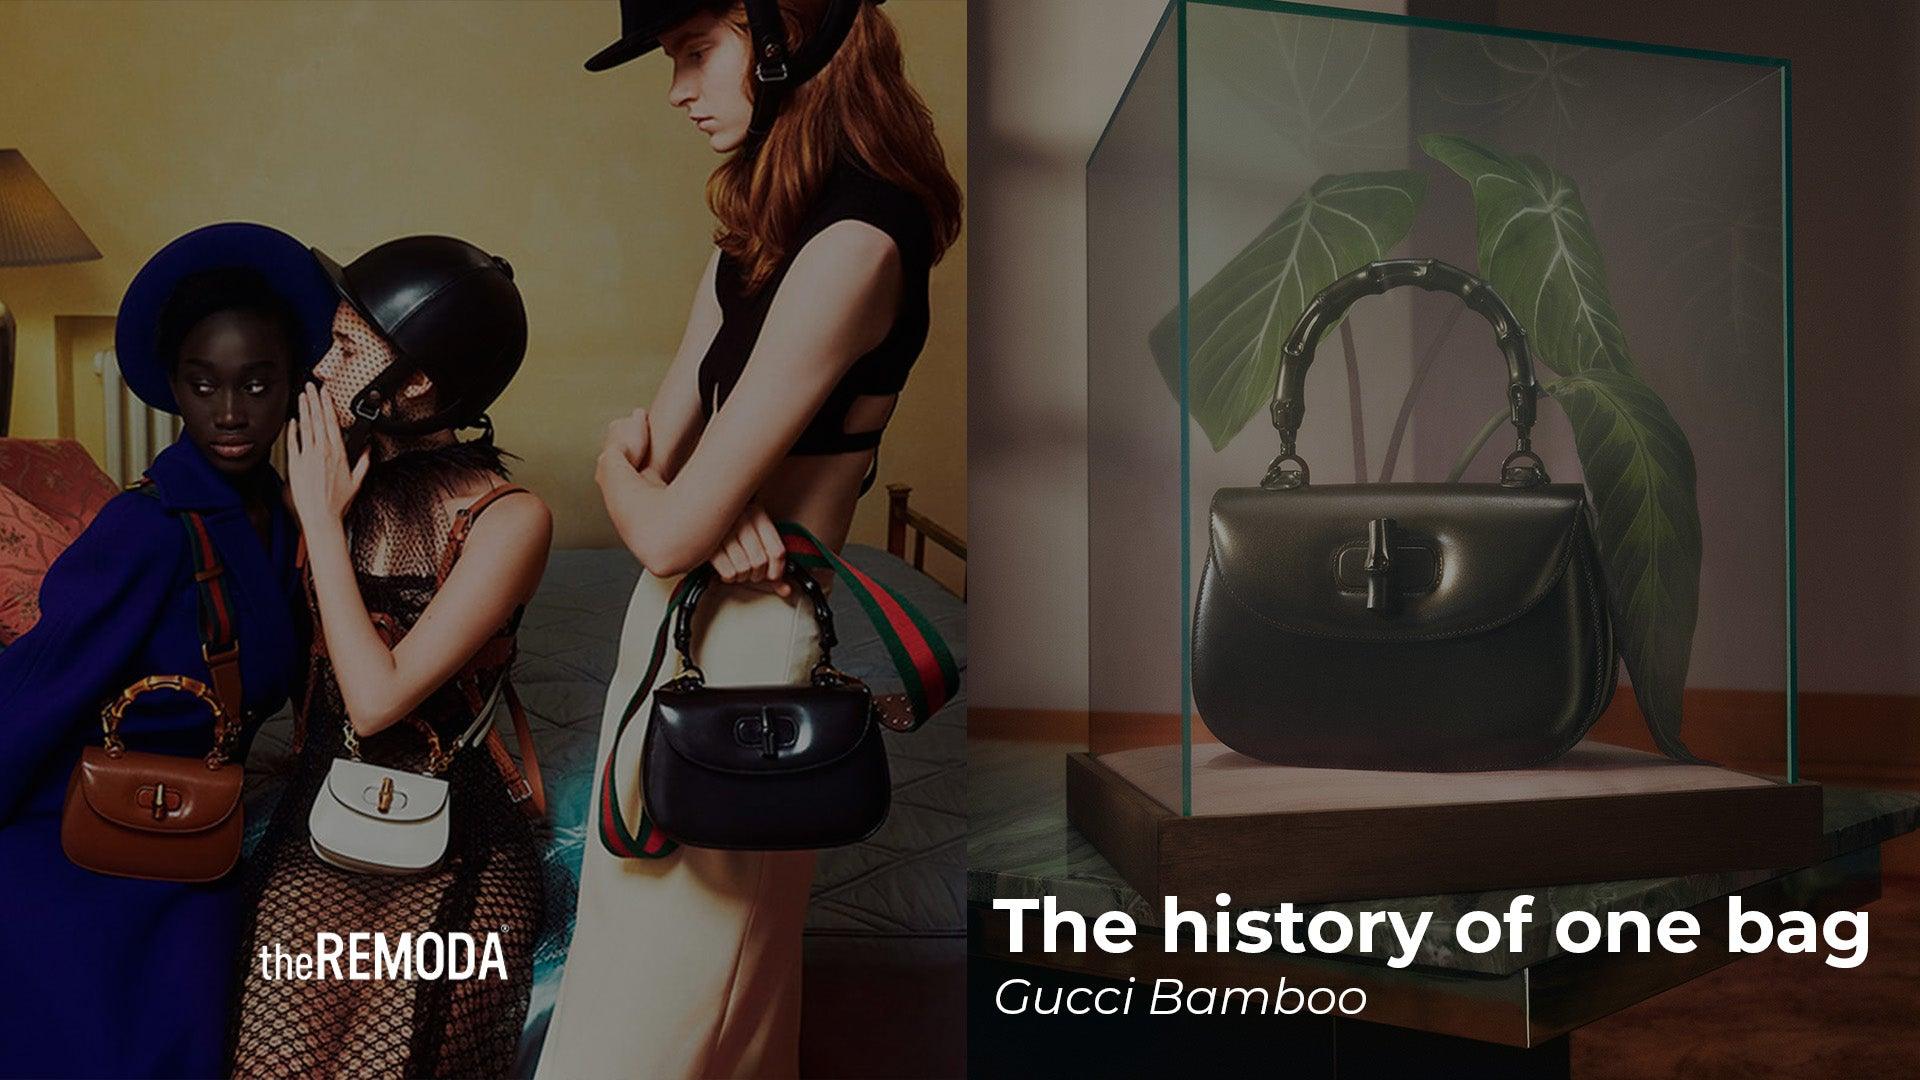 The history of one bag: Gucci Bamboo - theREMODA